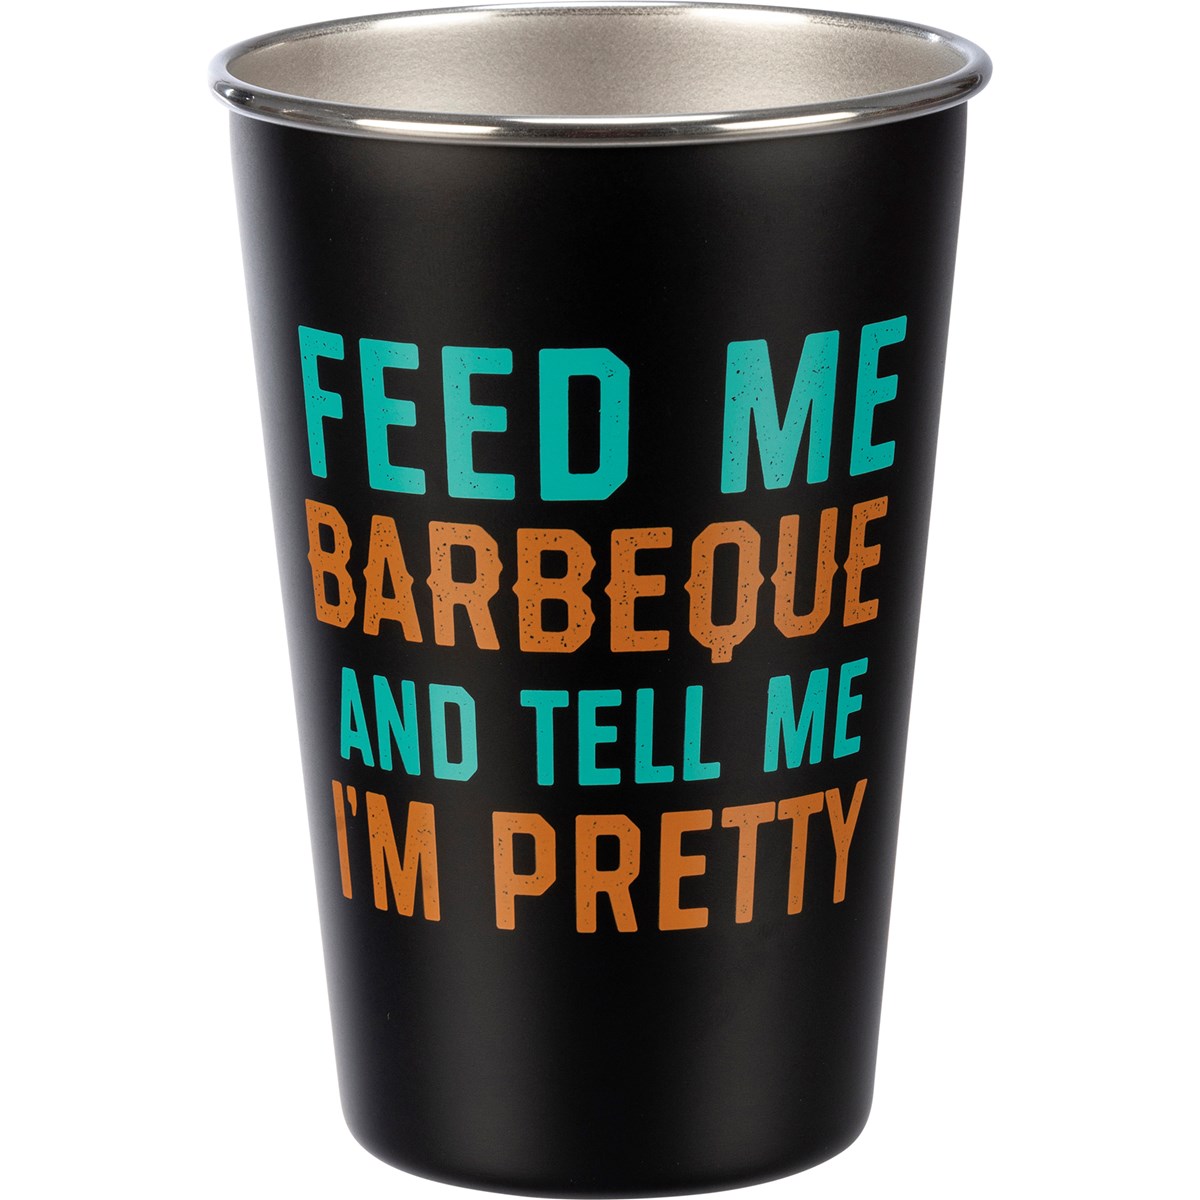 Pint - Feed Me Barbeque And Tell Me I'm Pretty - 16 oz., 3.50" Diameter x 4.75" - Stainless Steel